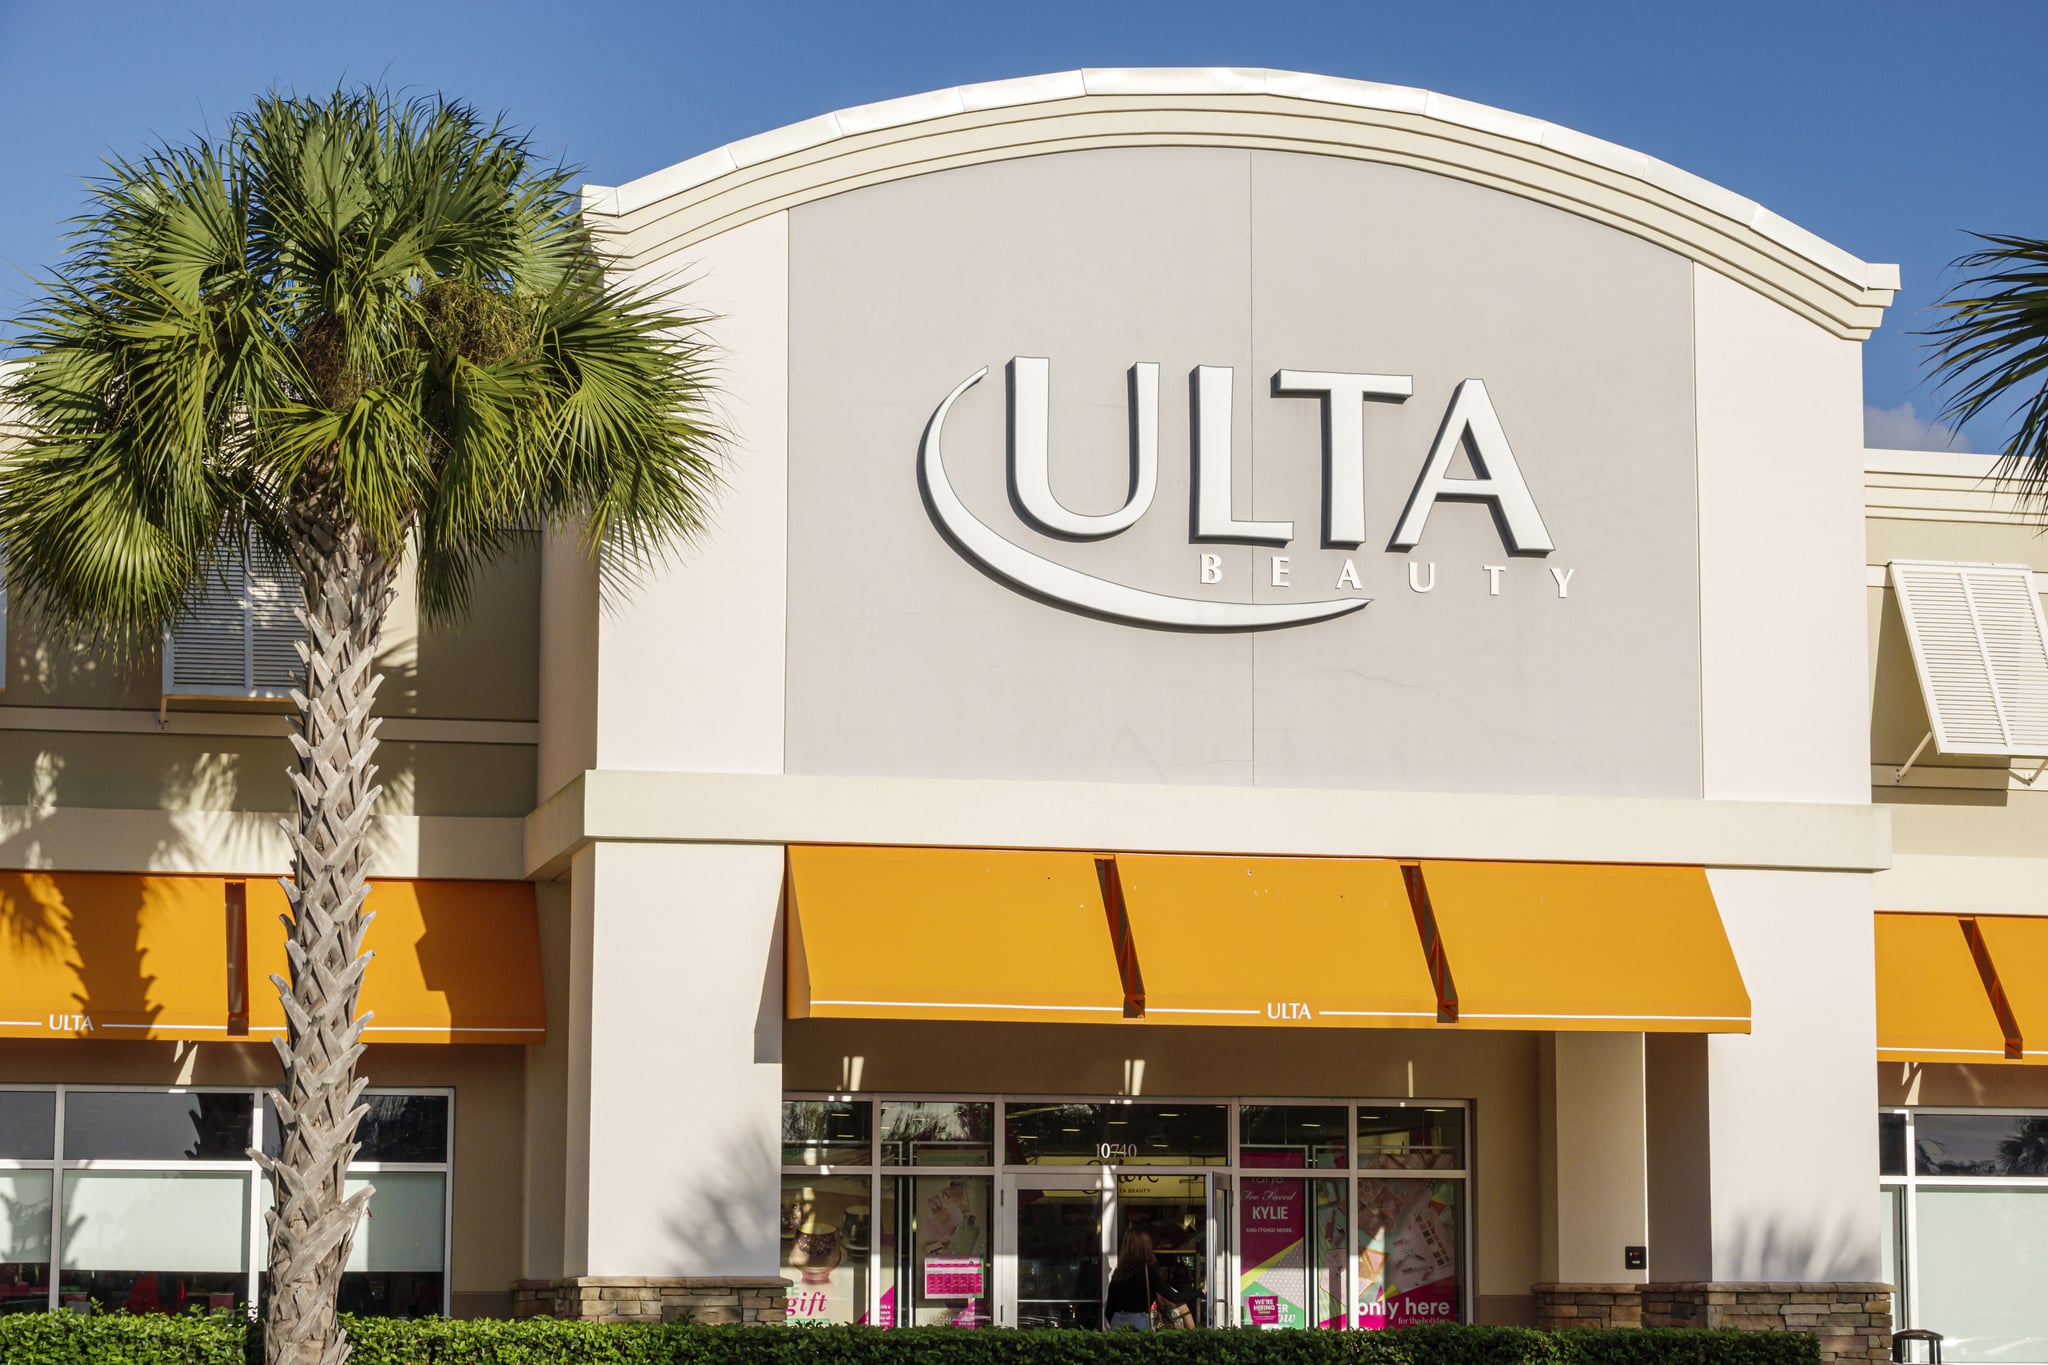 Florida, Port St Lucie, The Landing at Tradition, outdoor mall, Ulta, beauty cosmetics store. (Photo by: Jeff Greenberg/Education Images/Universal Images Group via Getty Images)